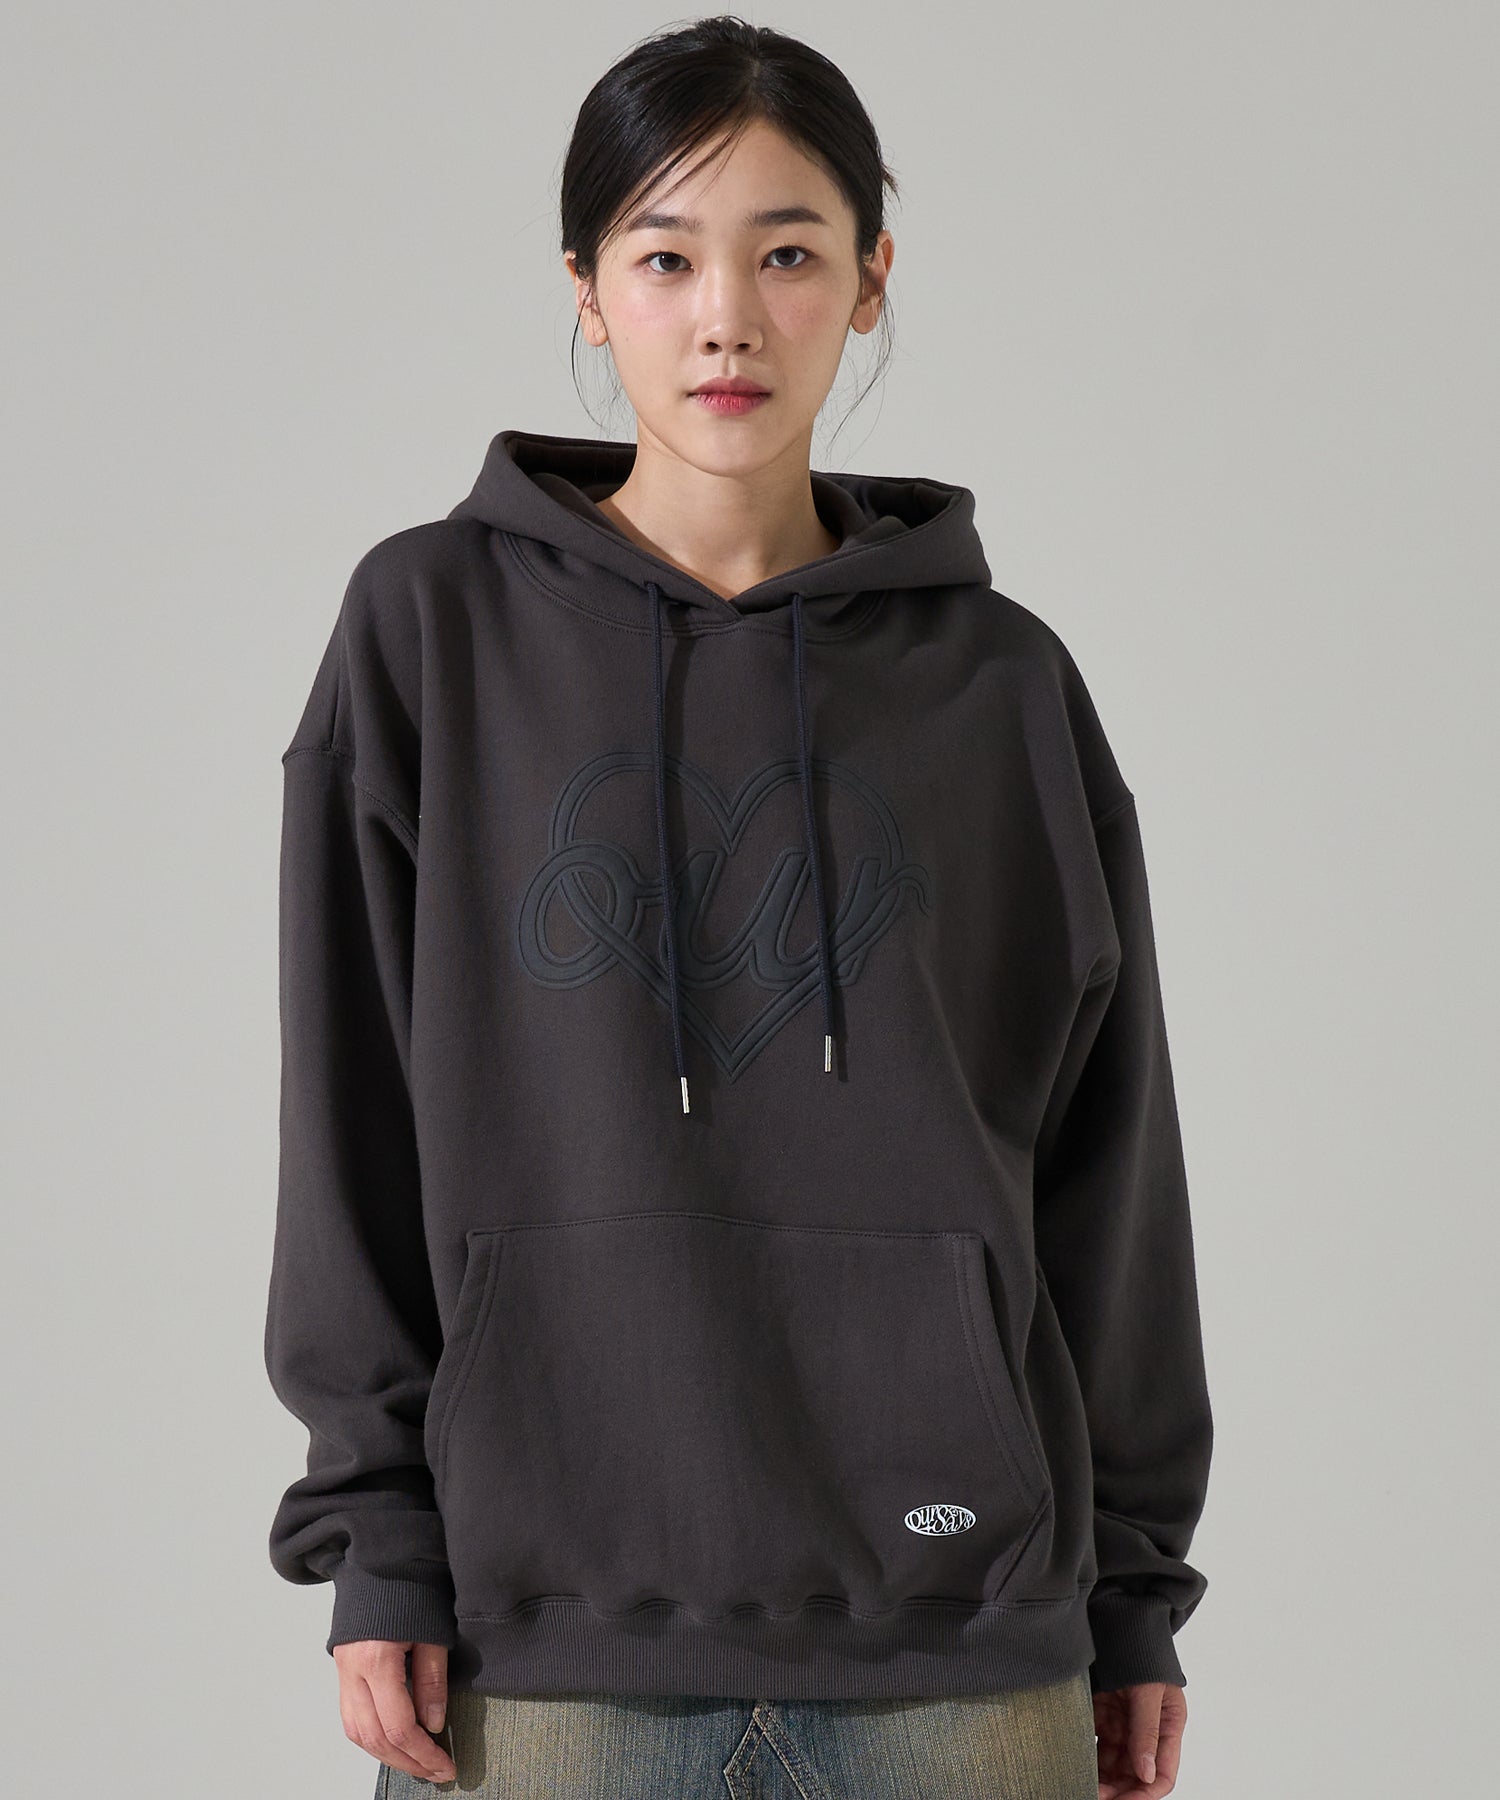 Our Heart Hoodie Charcoal